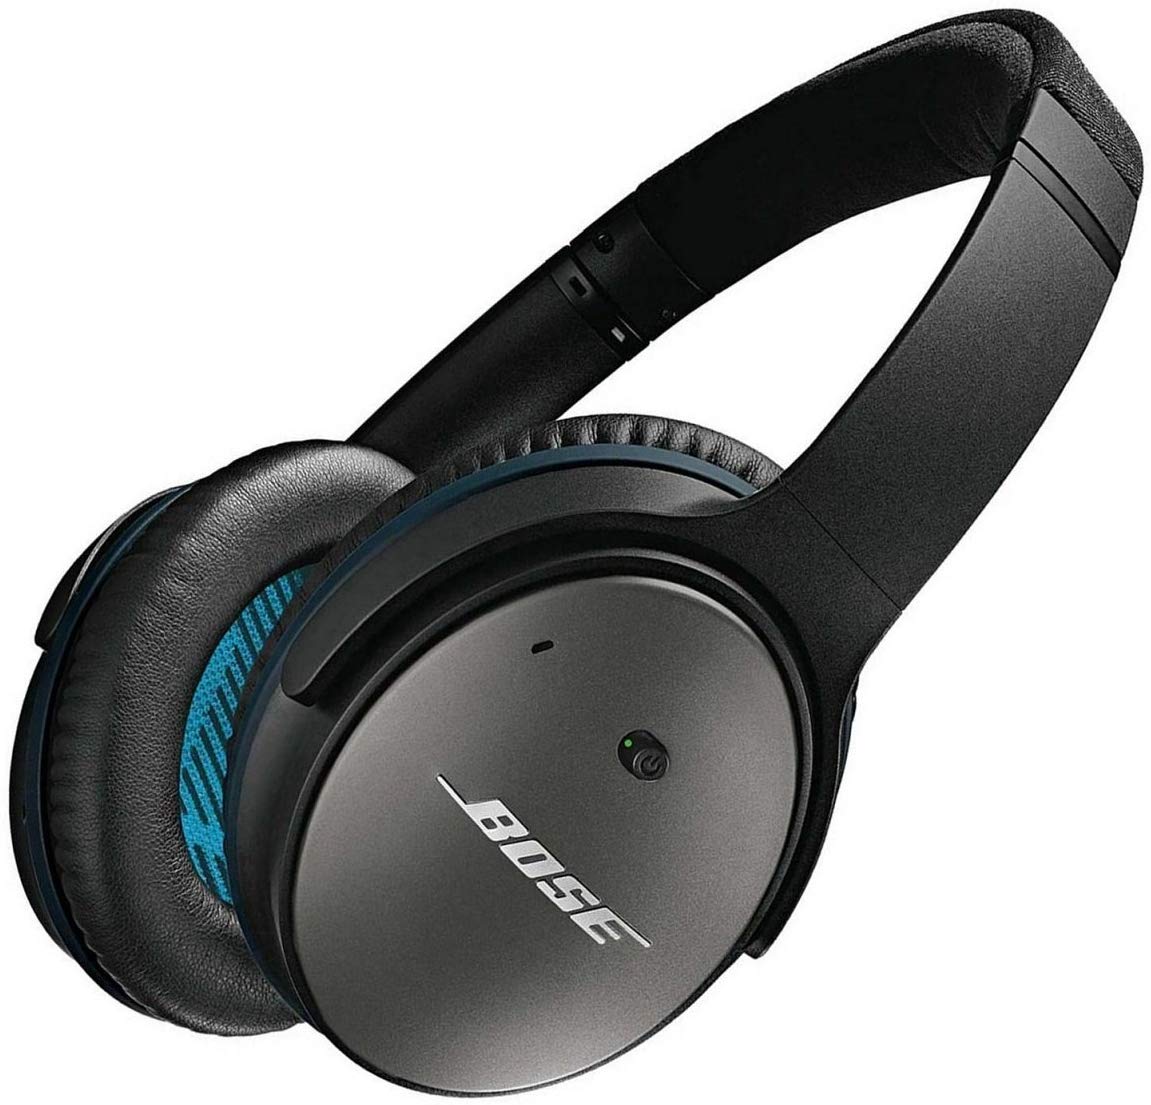 Bose QuietComfort 25 Acoustic Noise Cancelling Headphones for